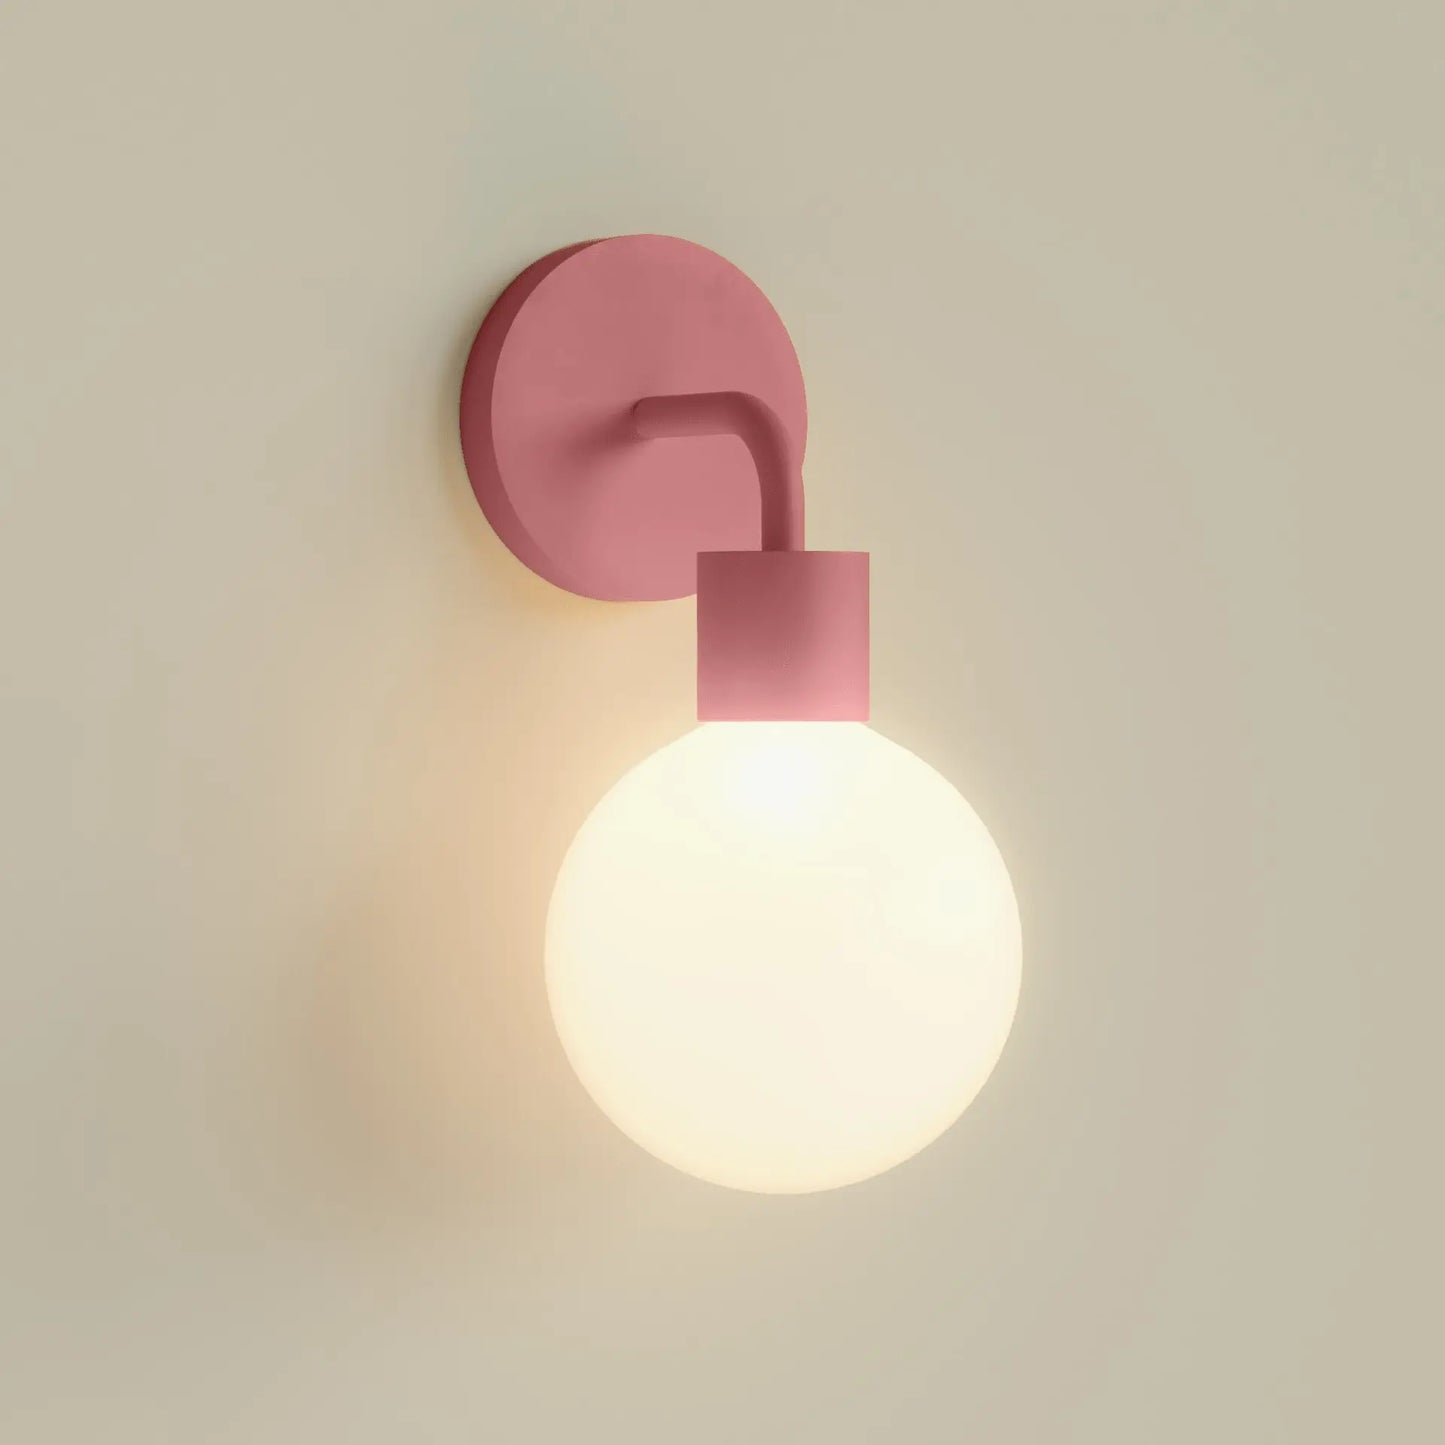 Dusty Rose or Pink wall sconce designed that's renter friendly